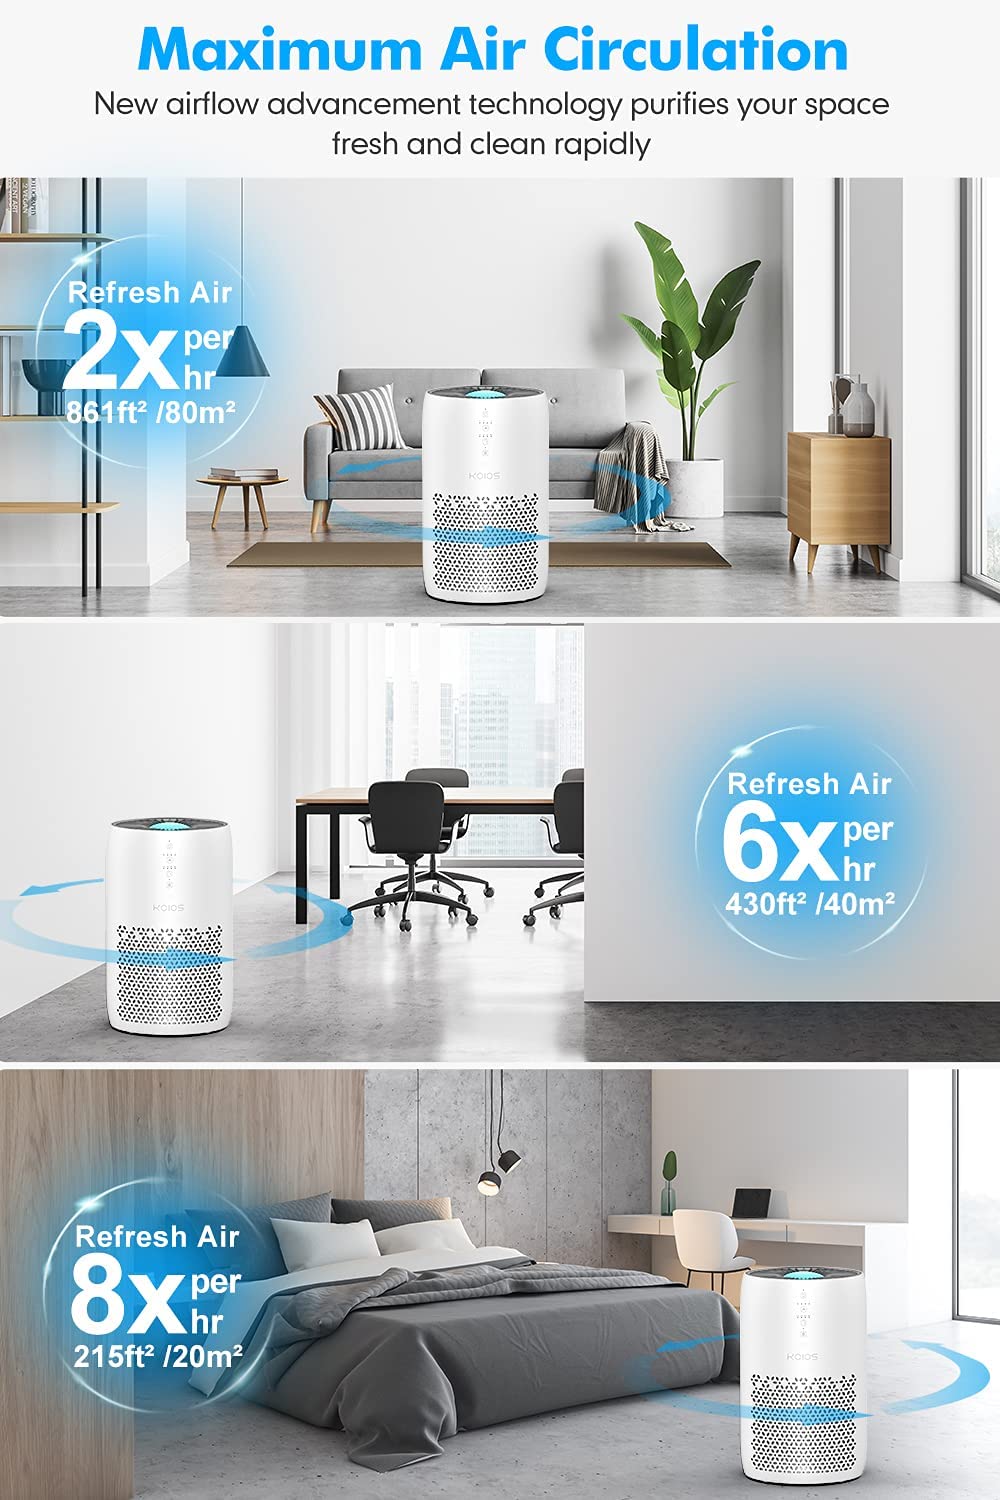 Breathe Clean Air with KOIOS: The Top Air Purifier for Your Home